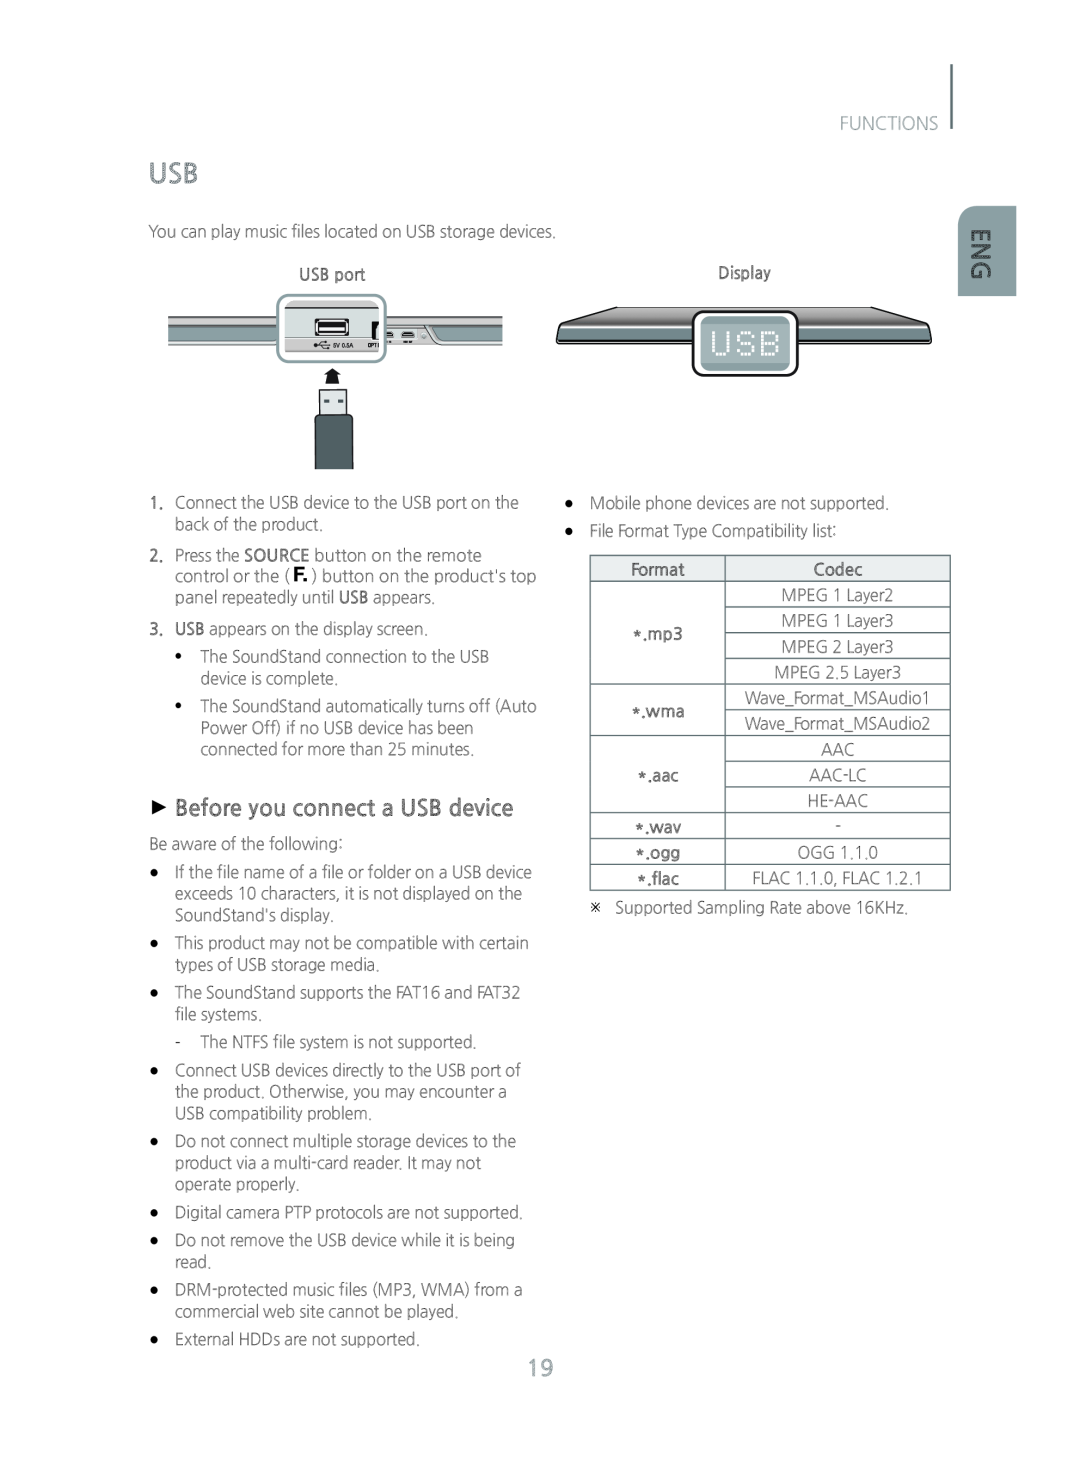 Samsung HW-H600/ZA manual +Before you connect a USB device, Functions, USB port, Display, Format, Codec, flac 